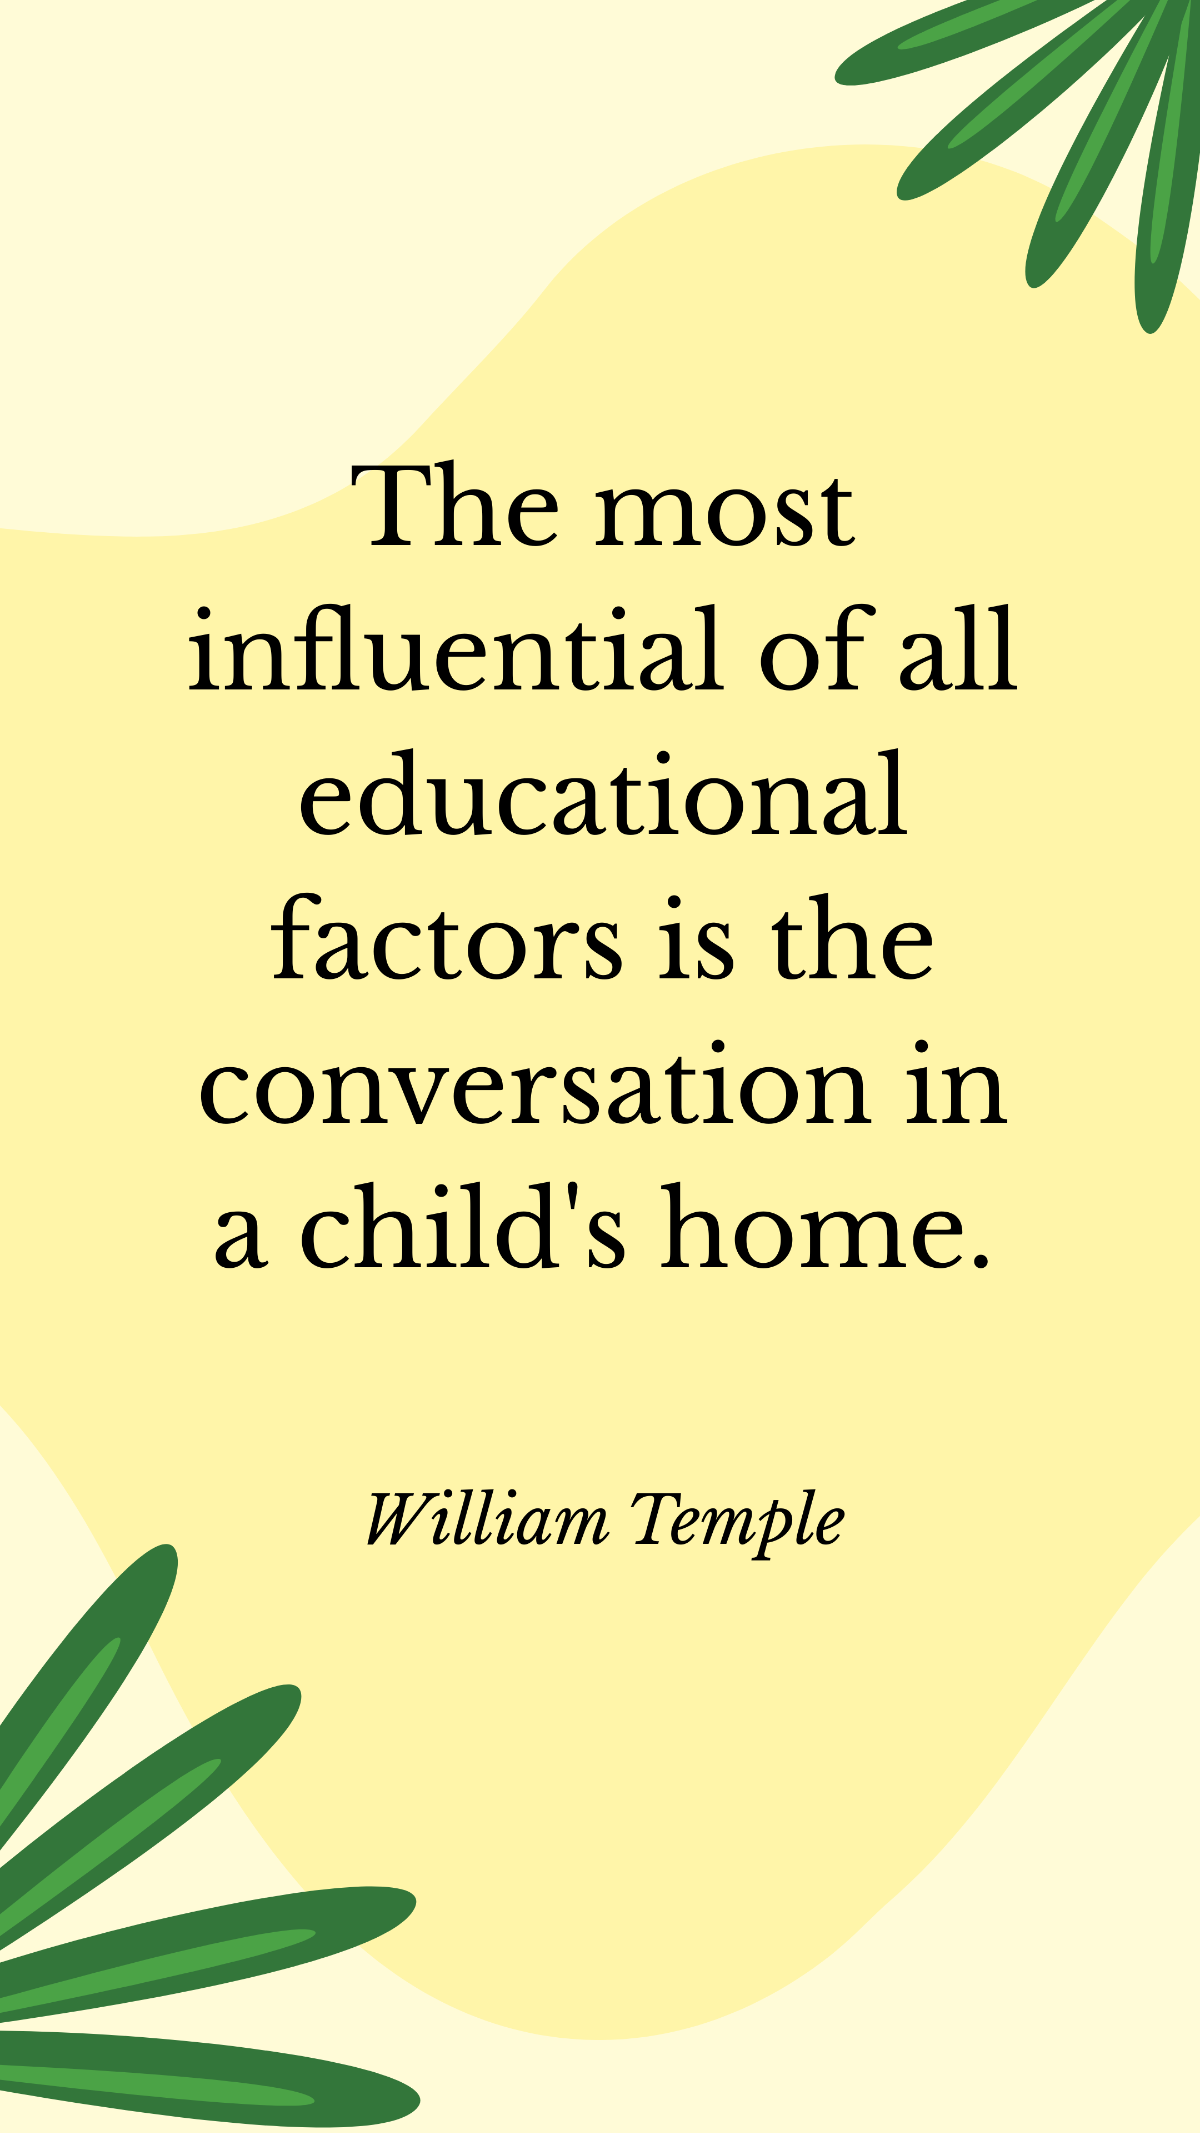 Free William Temple - The most influential of all educational factors is the conversation in a child's home. Template